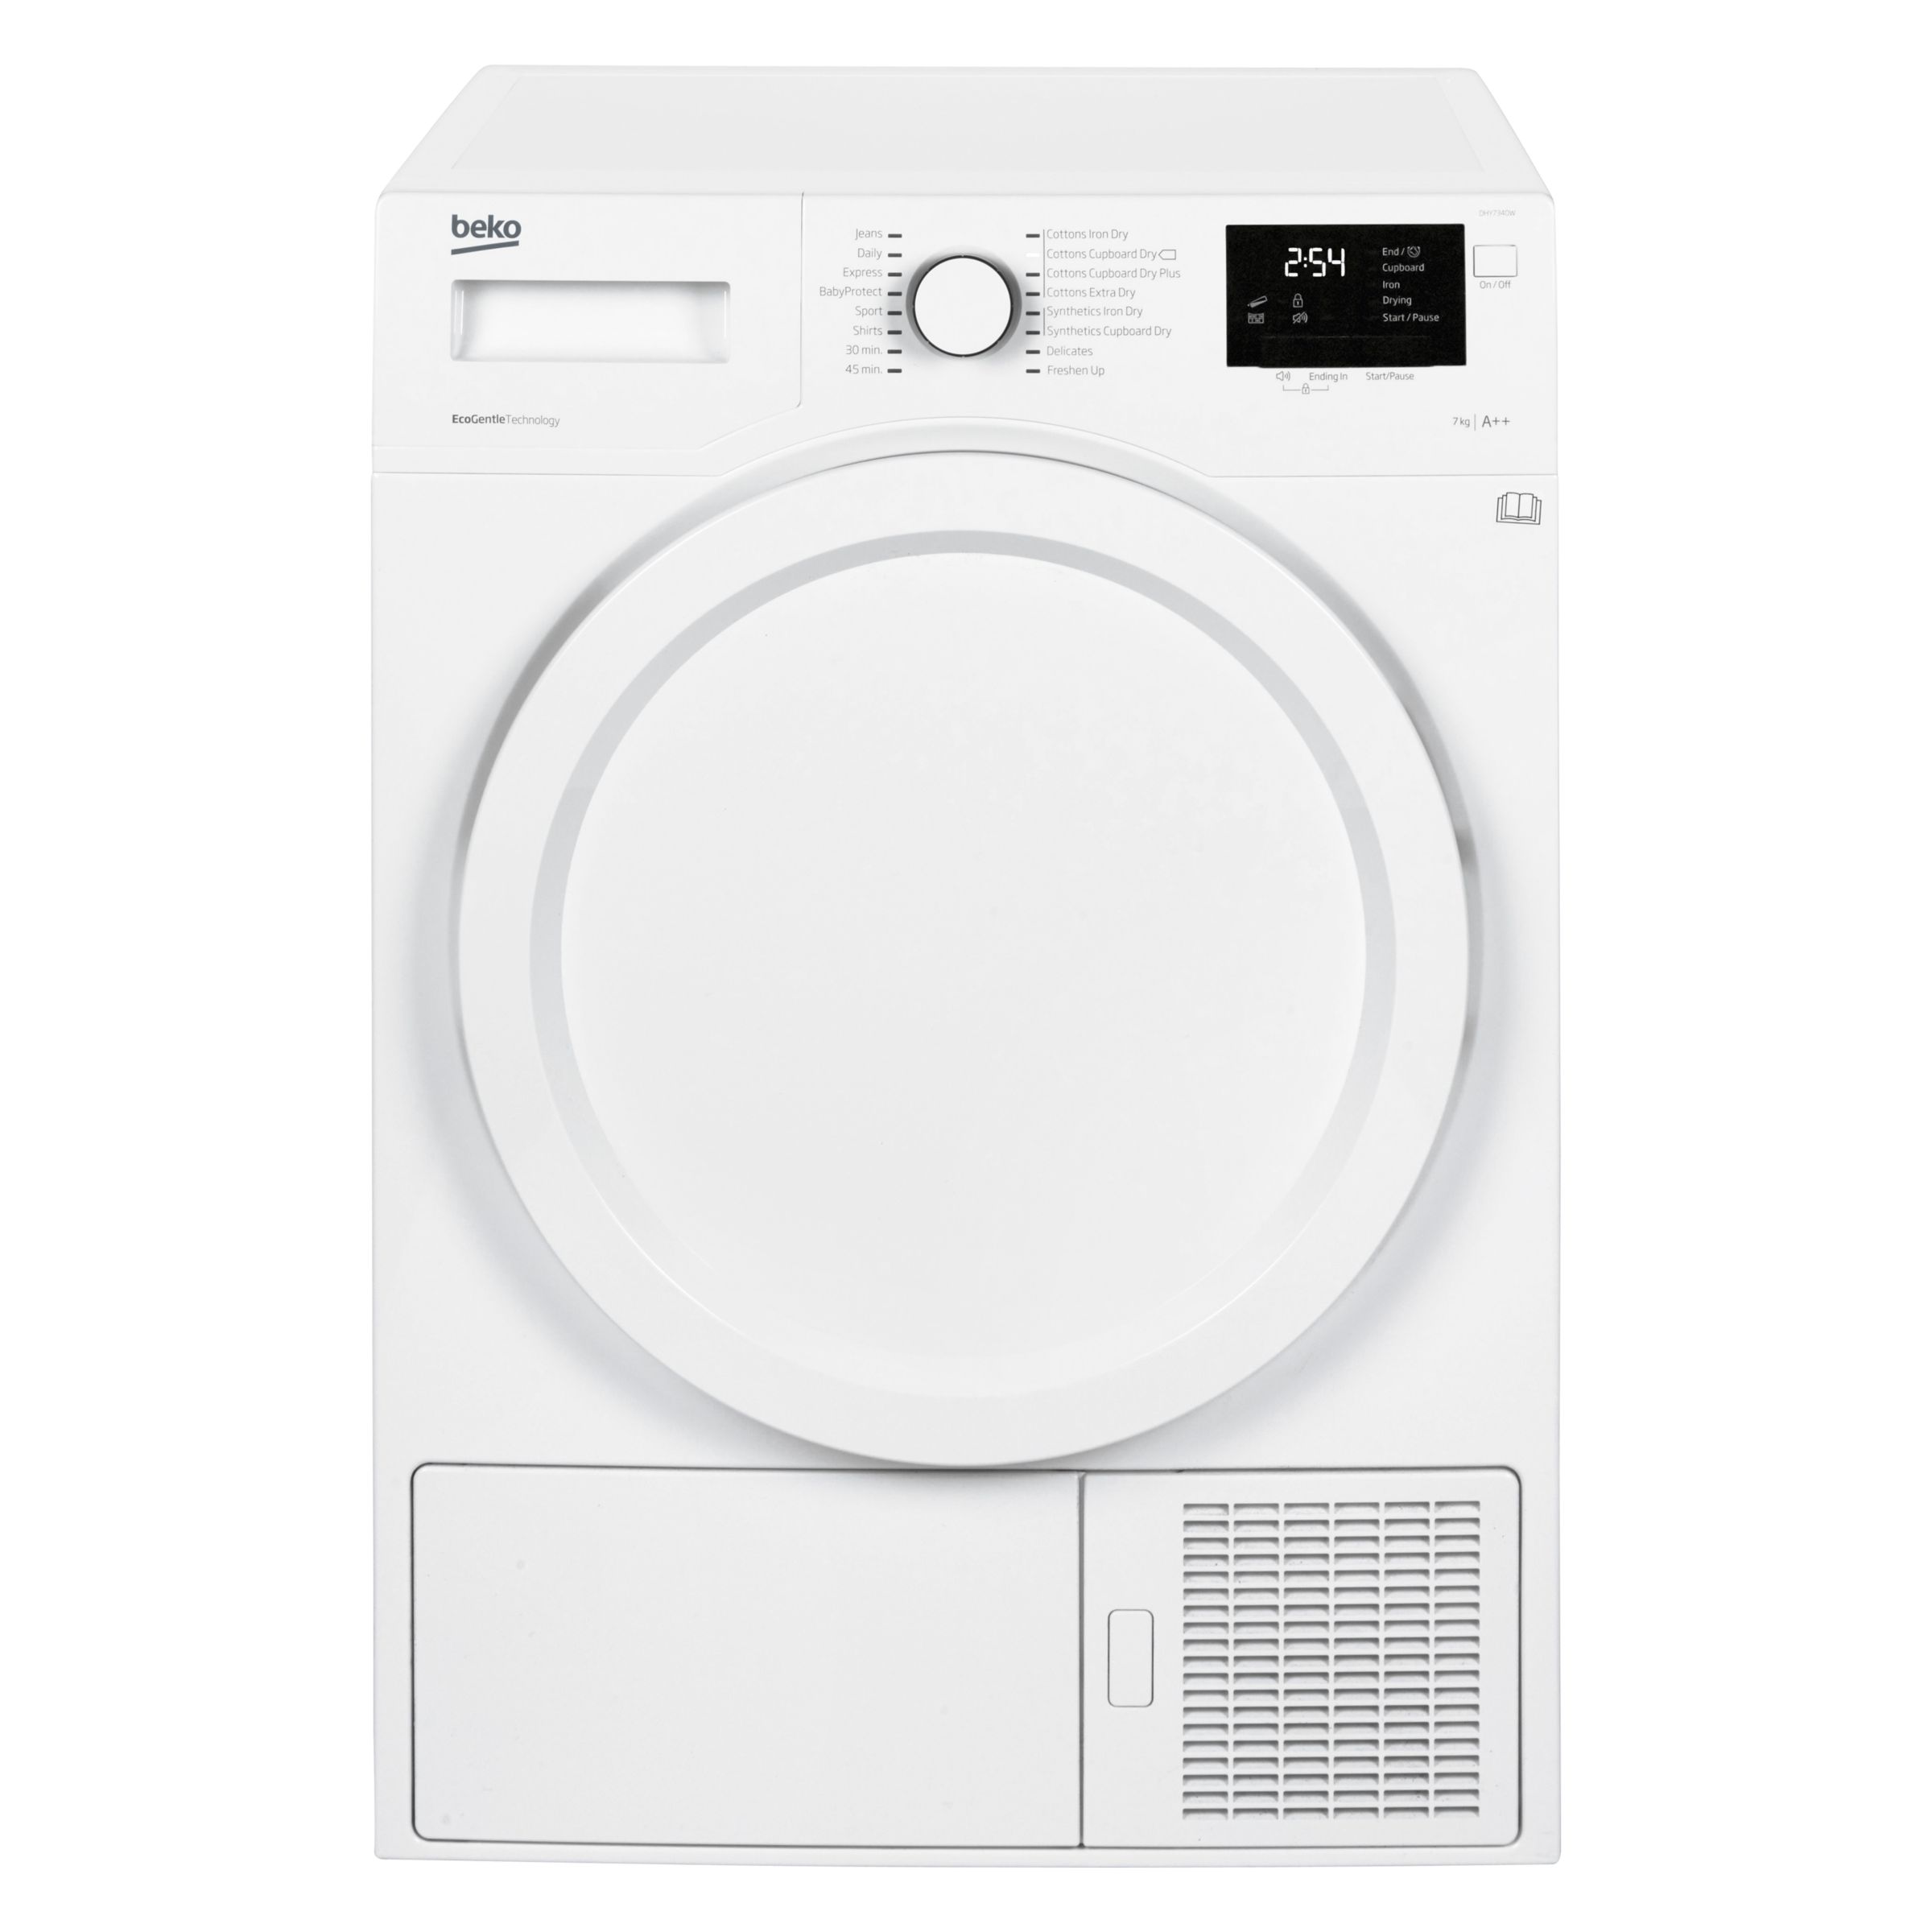 Beko DHY7340W Heat Pump Tumble Dryer, 7kg Load, A++ Energy Rating, White